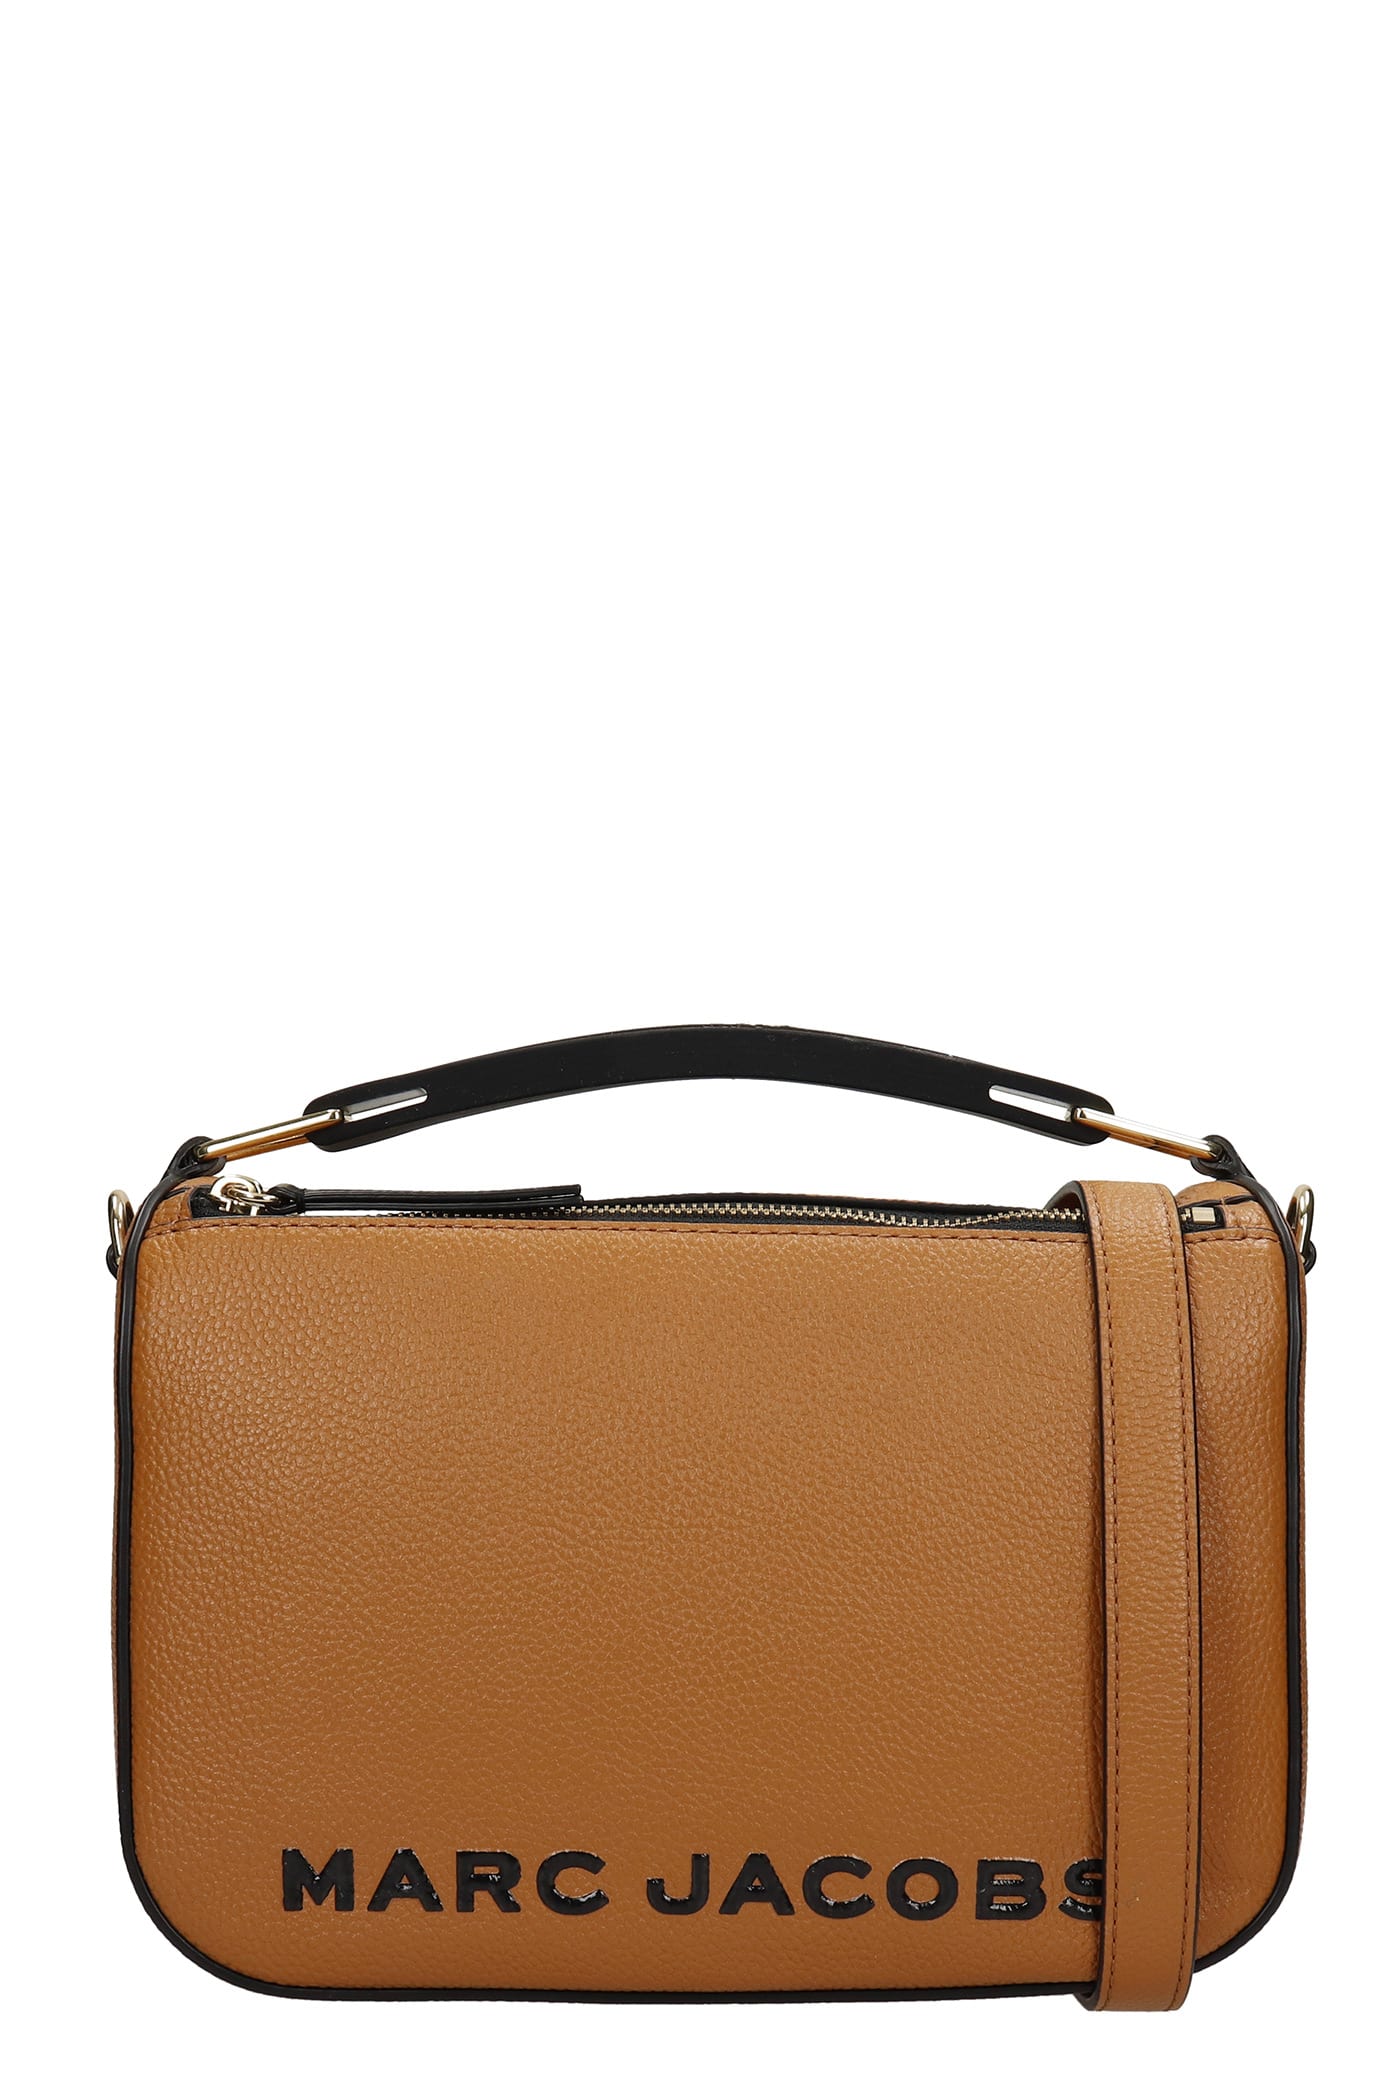 Marc Jacobs Hand Bag In Leather Color Leather